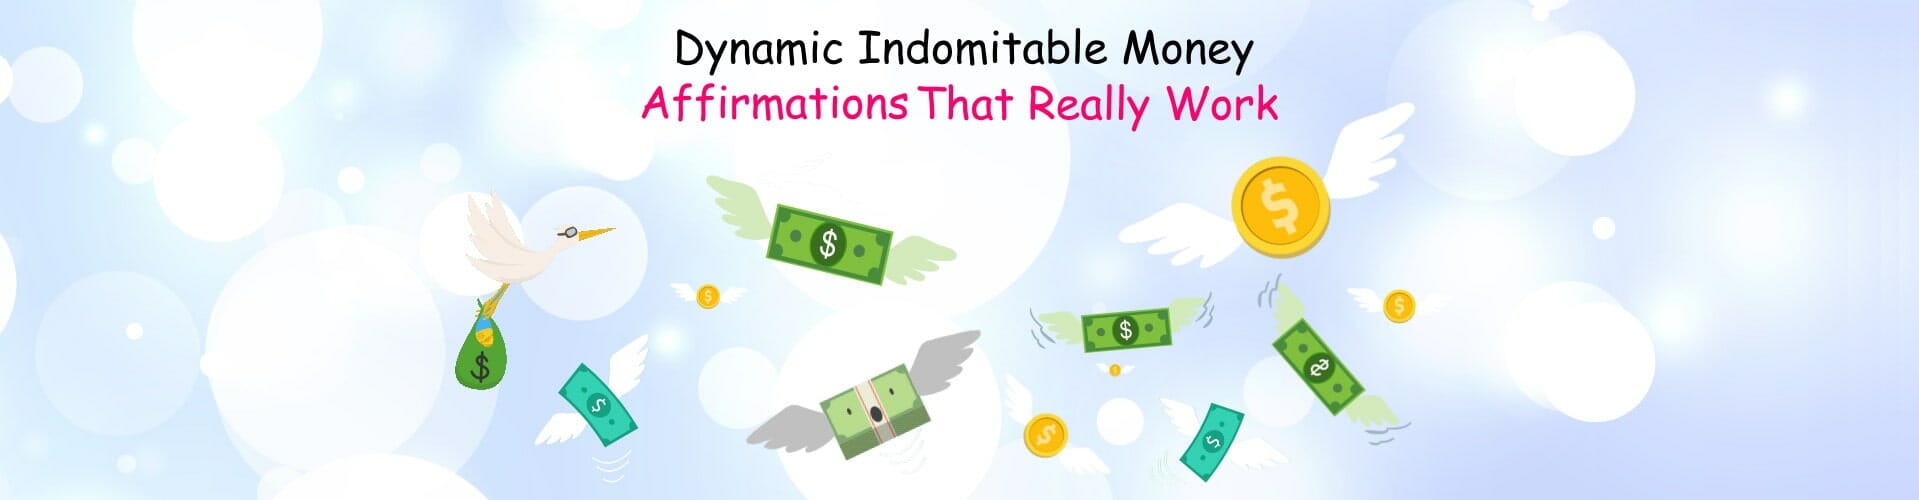 Powerful money affirmations that really work